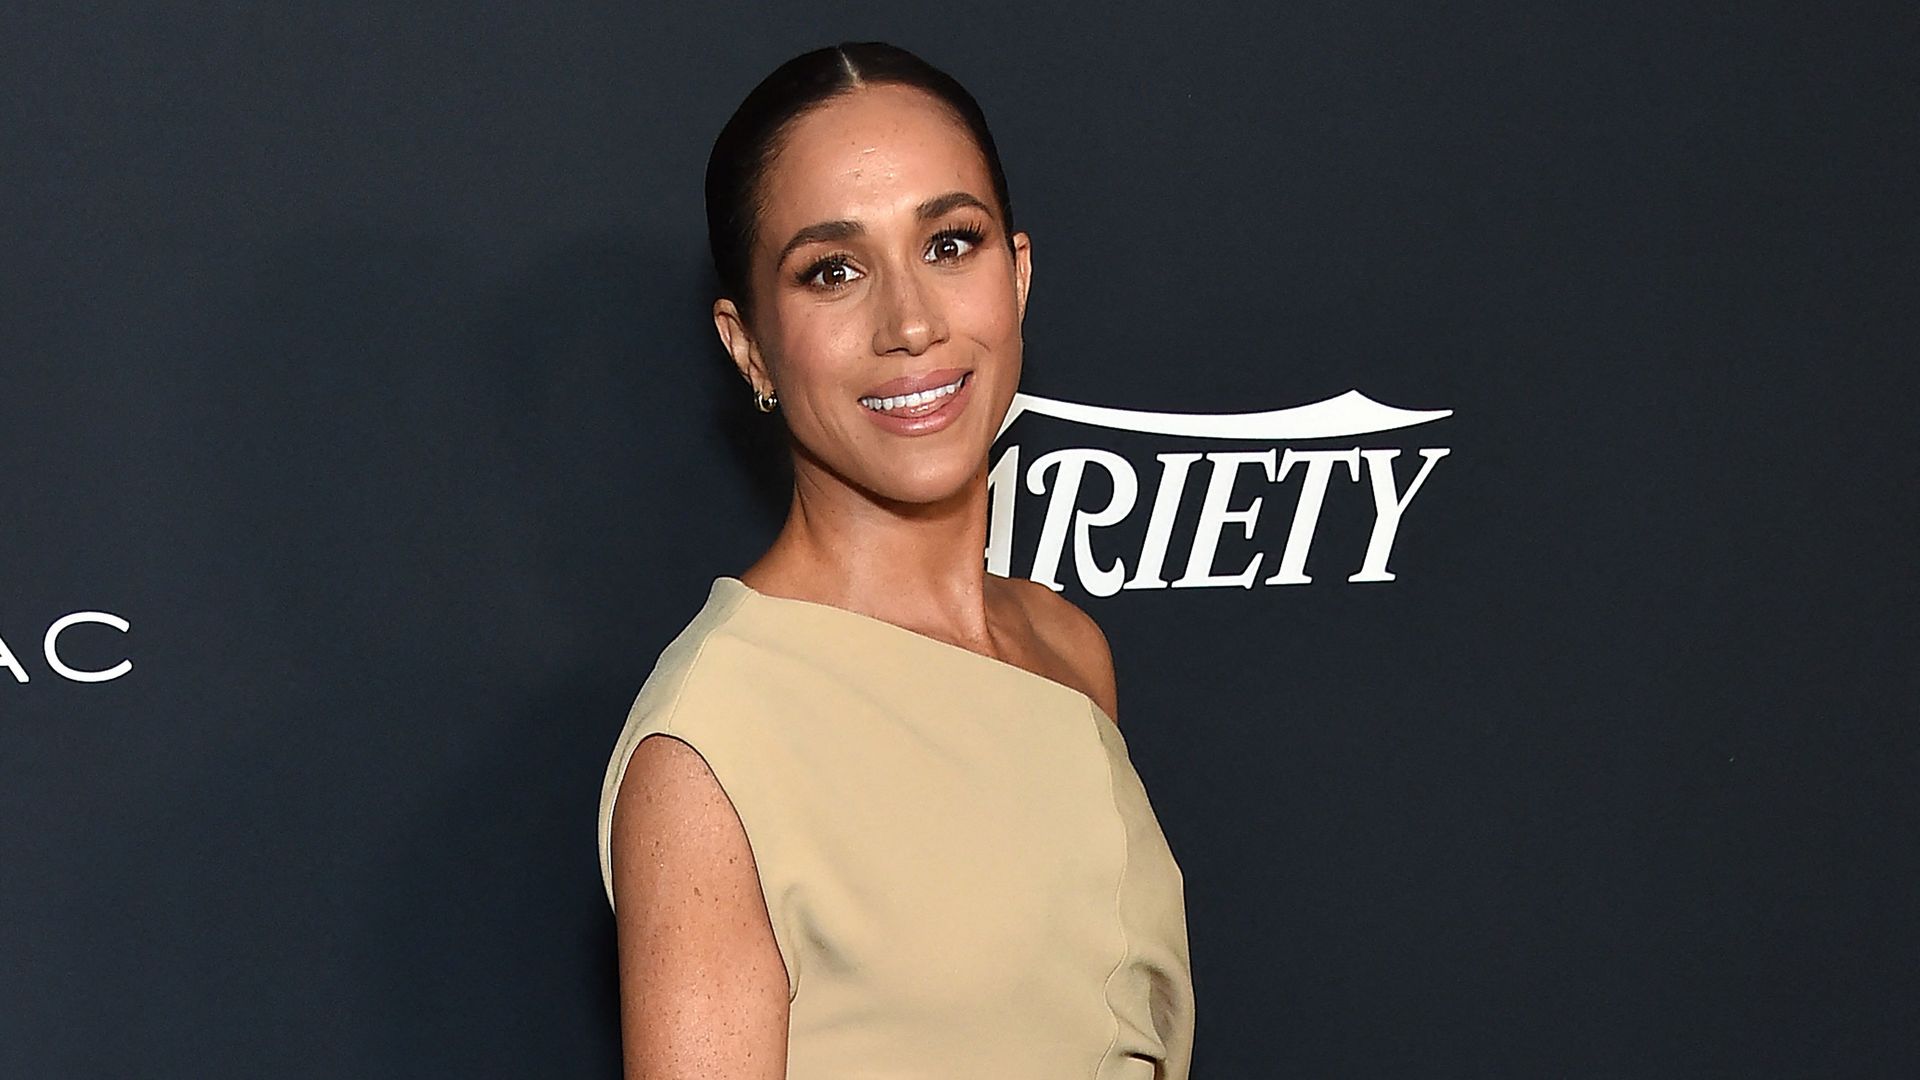 Meghan Markle arrives for Variety's Power of Women event at Mother Wolf in Los Angeles, California, on November 16, 2023. The 2023 honorees include US singer Fantasia Barrino, US singer-songwriter Billie Eilish, English actress Carey Mulligan, US actress Lily Gladstone, British actress Emily Blunt, and Margot Robbie's LuckyChap. (Photo by LISA O'CONNOR / AFP) (Photo by LISA O'CONNOR/AFP via Getty Images)